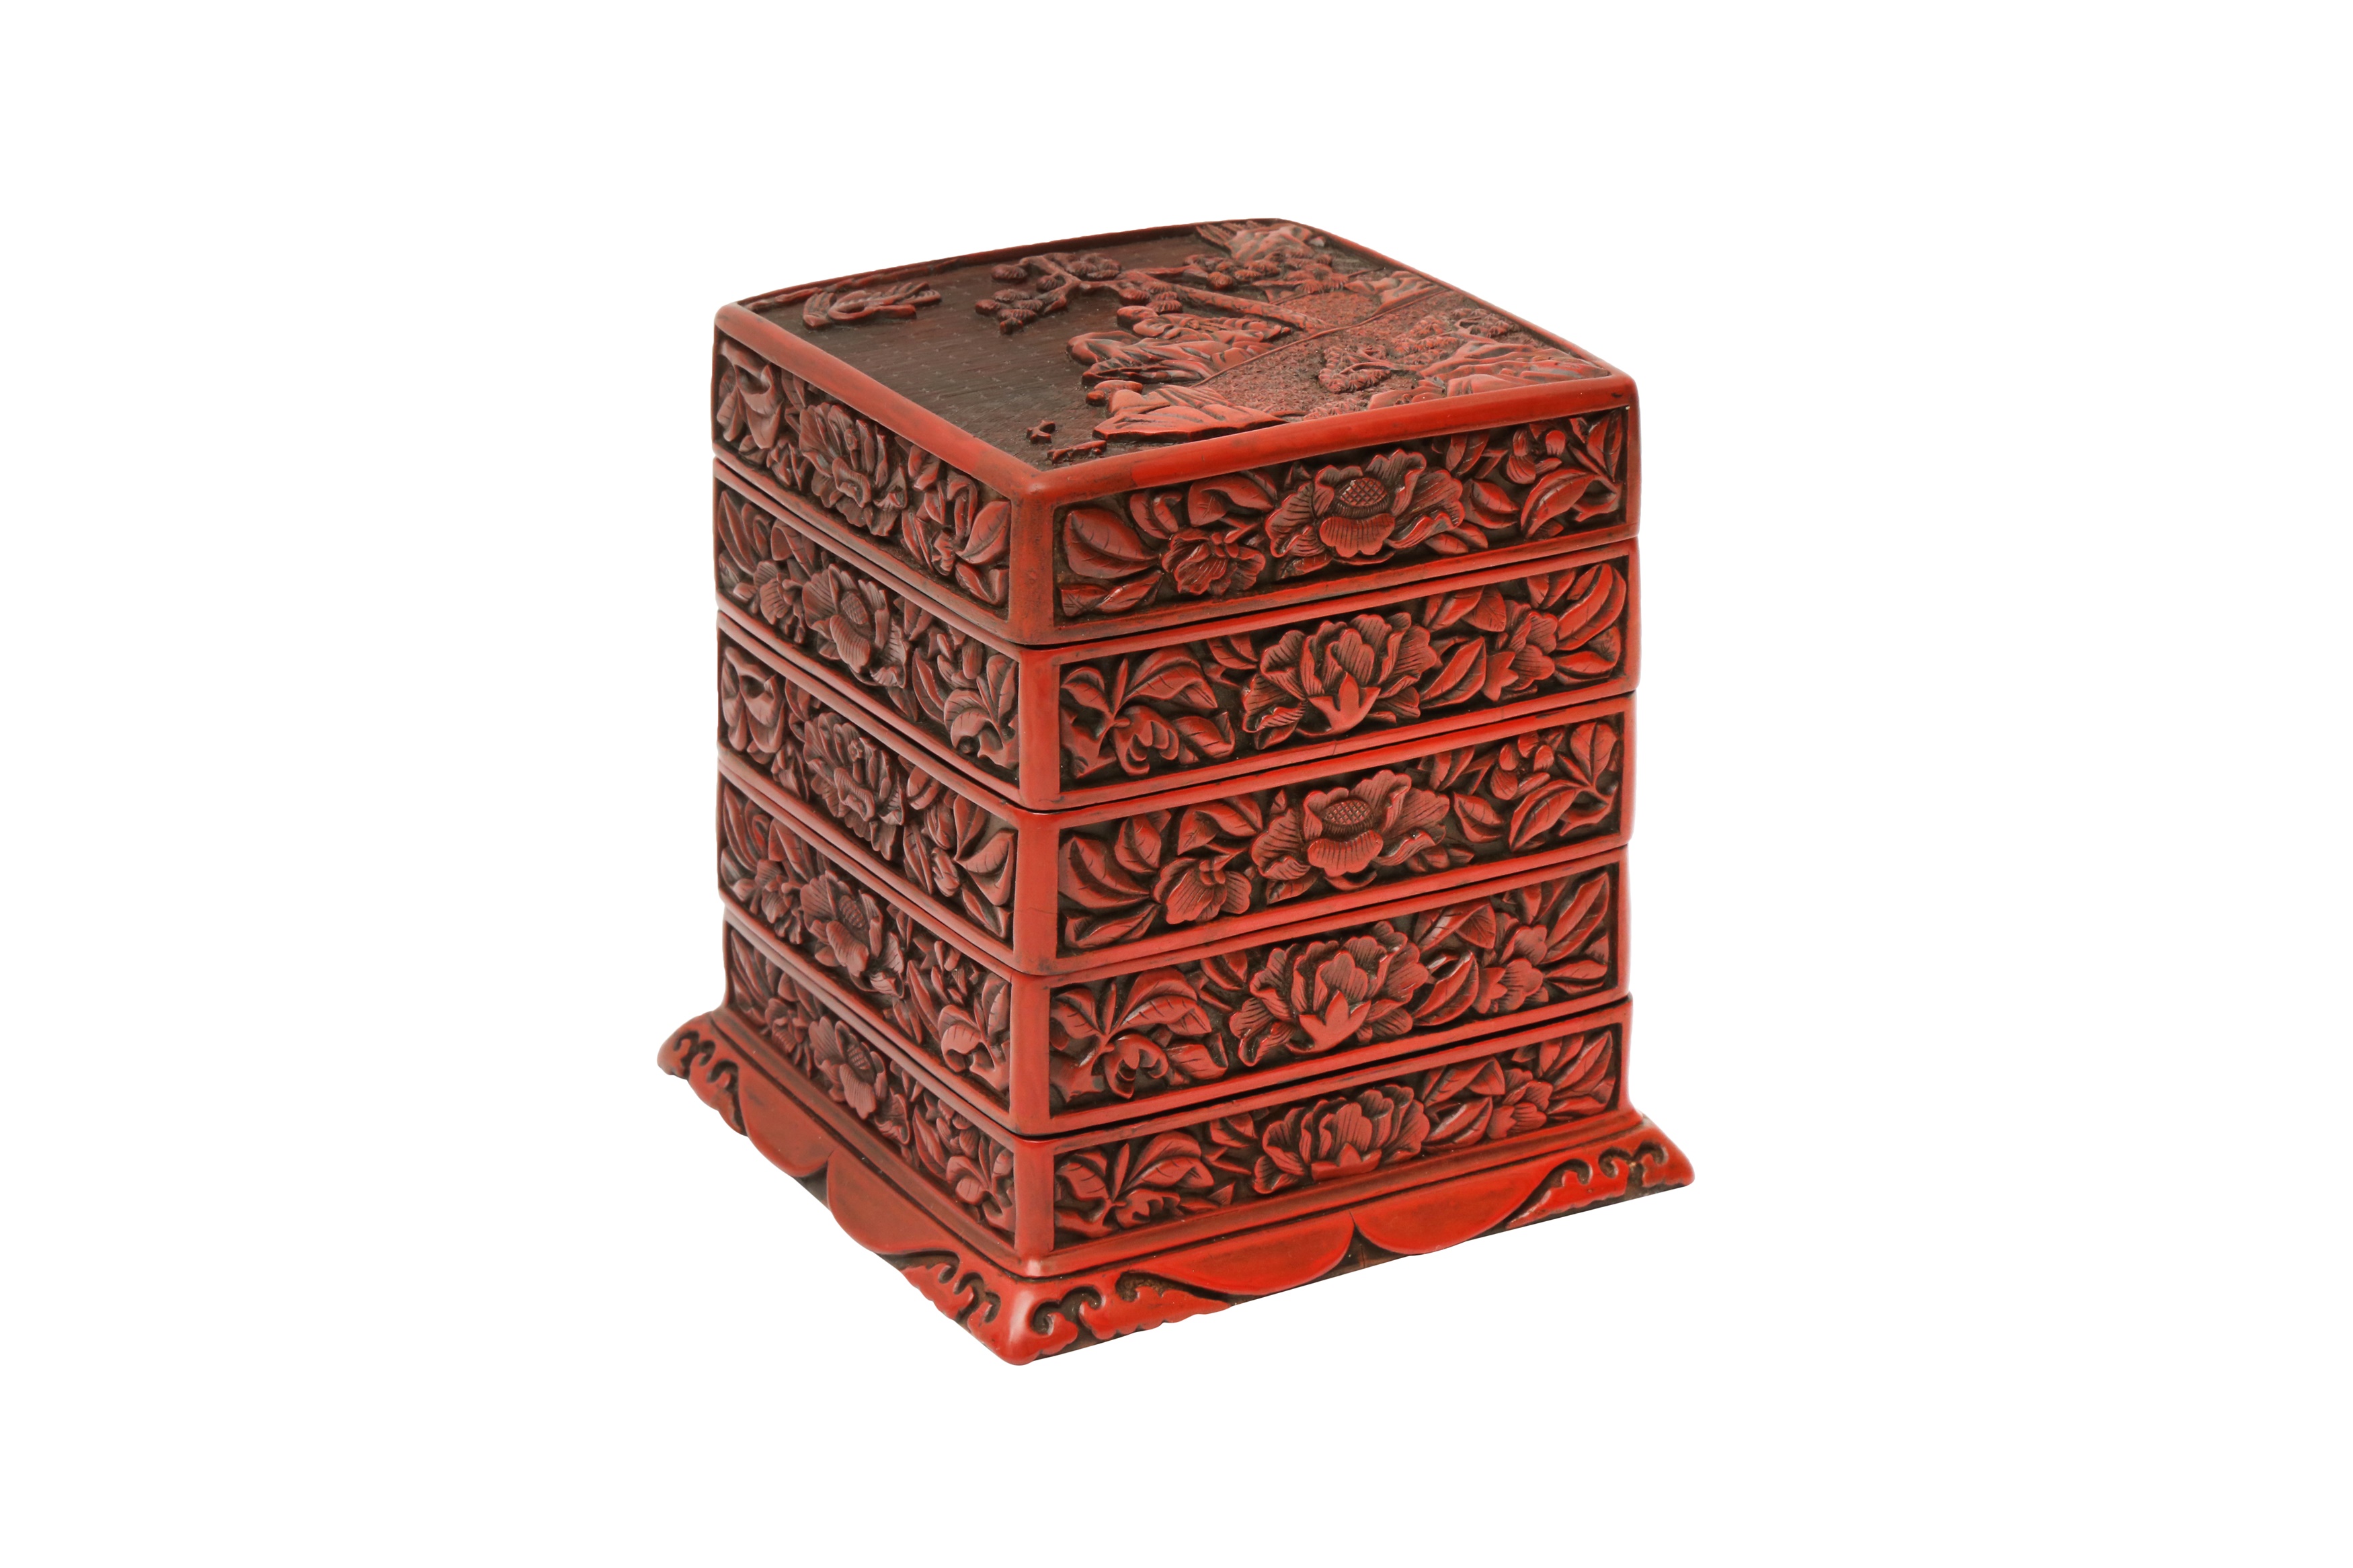 A CHINESE CINNABAR LACQUER TIERED BOX AND COVER 明 剔紅士大夫圖紋四層蓋盒